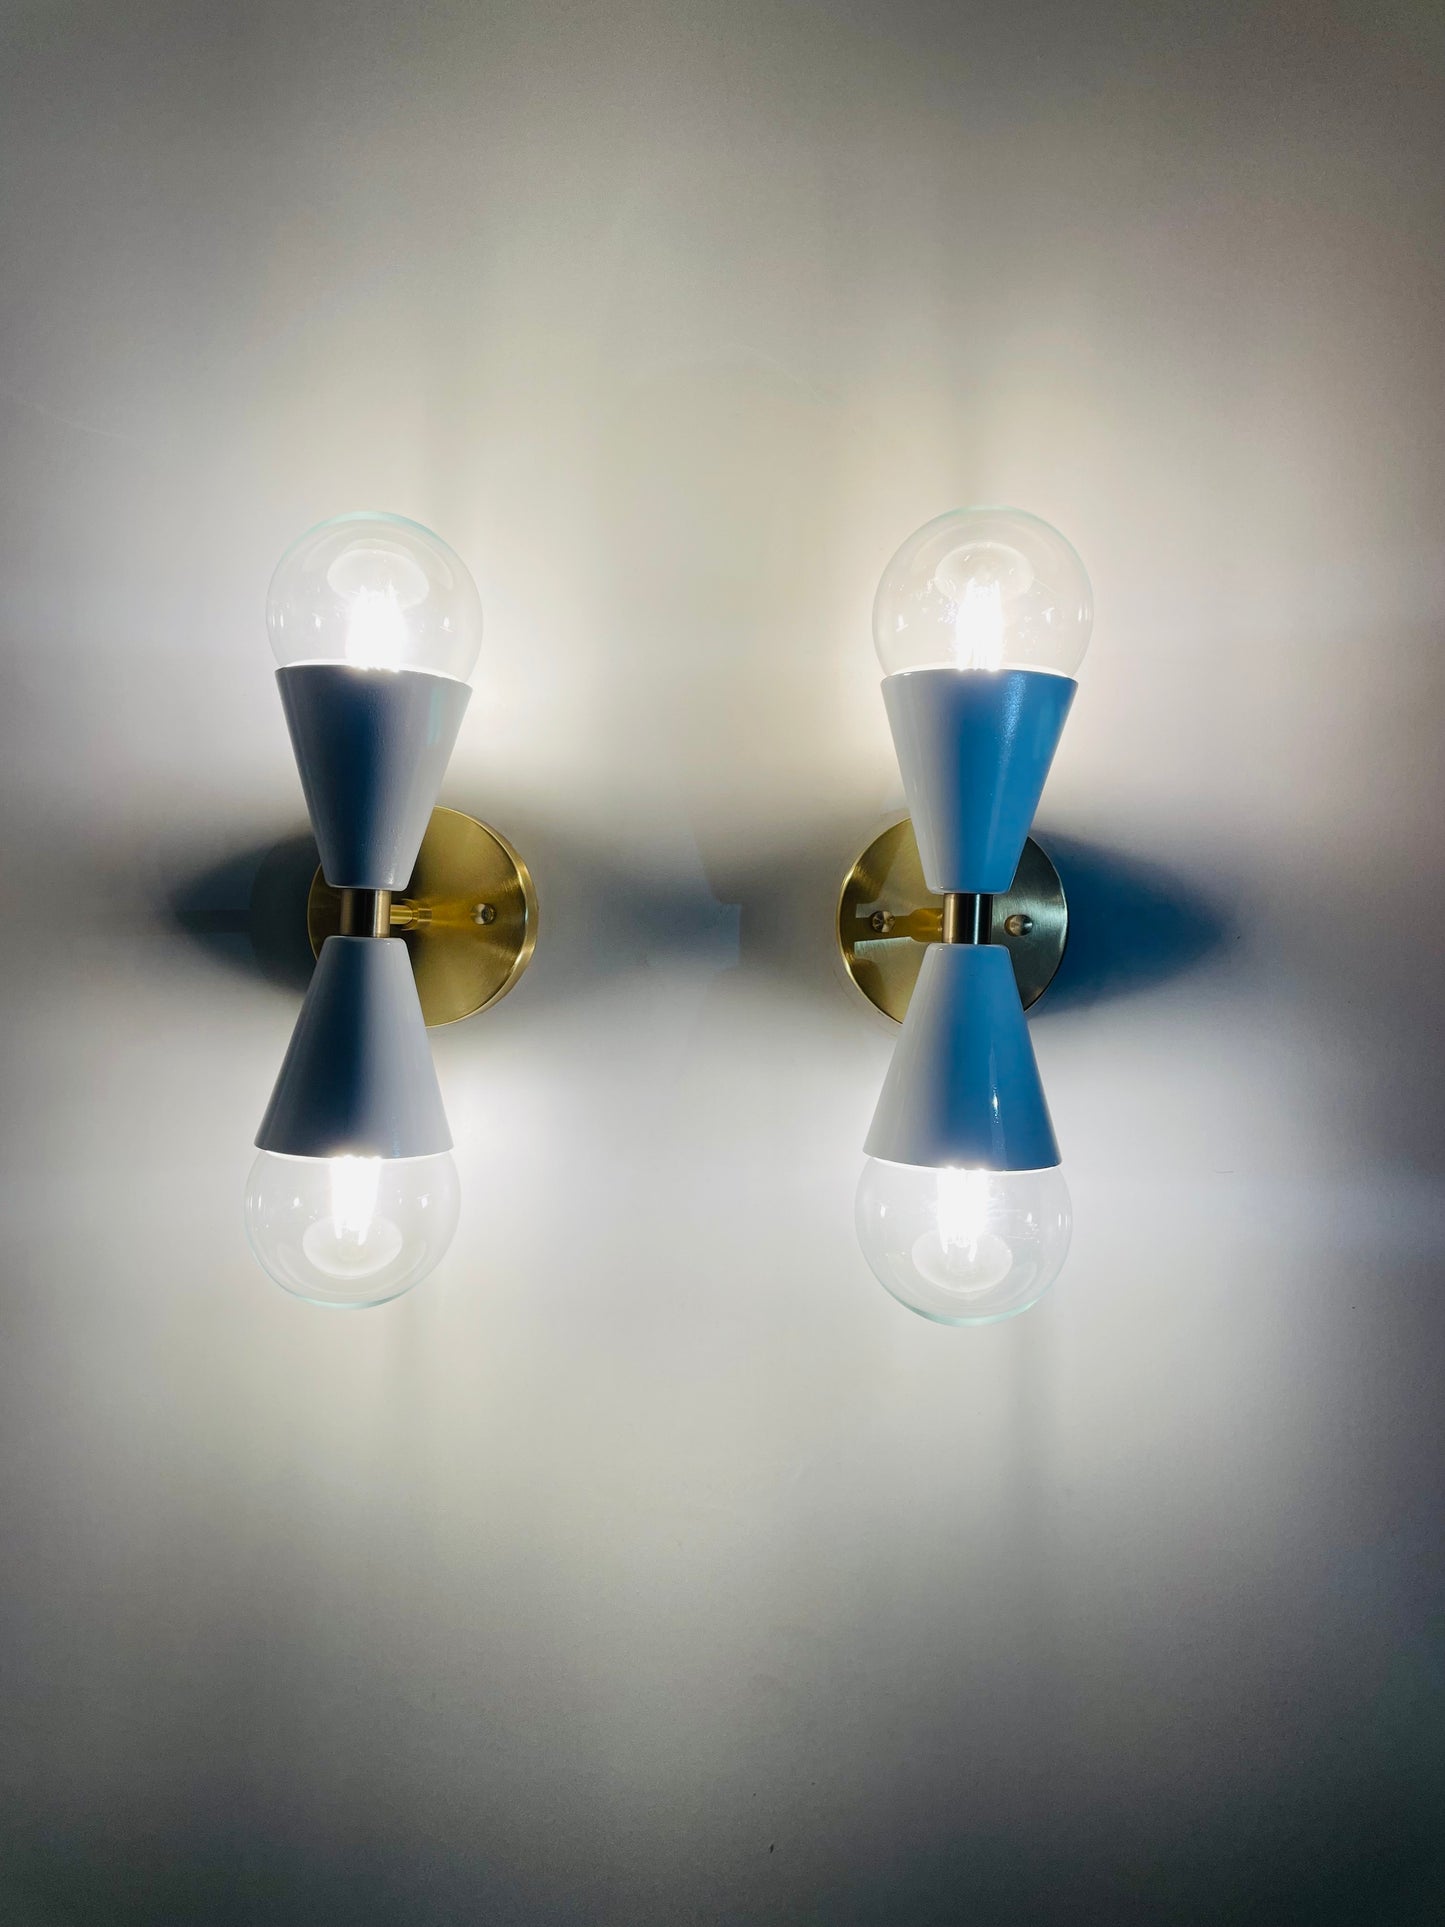 Illuminate Your Space with Italian Diabolo Wall Sconce